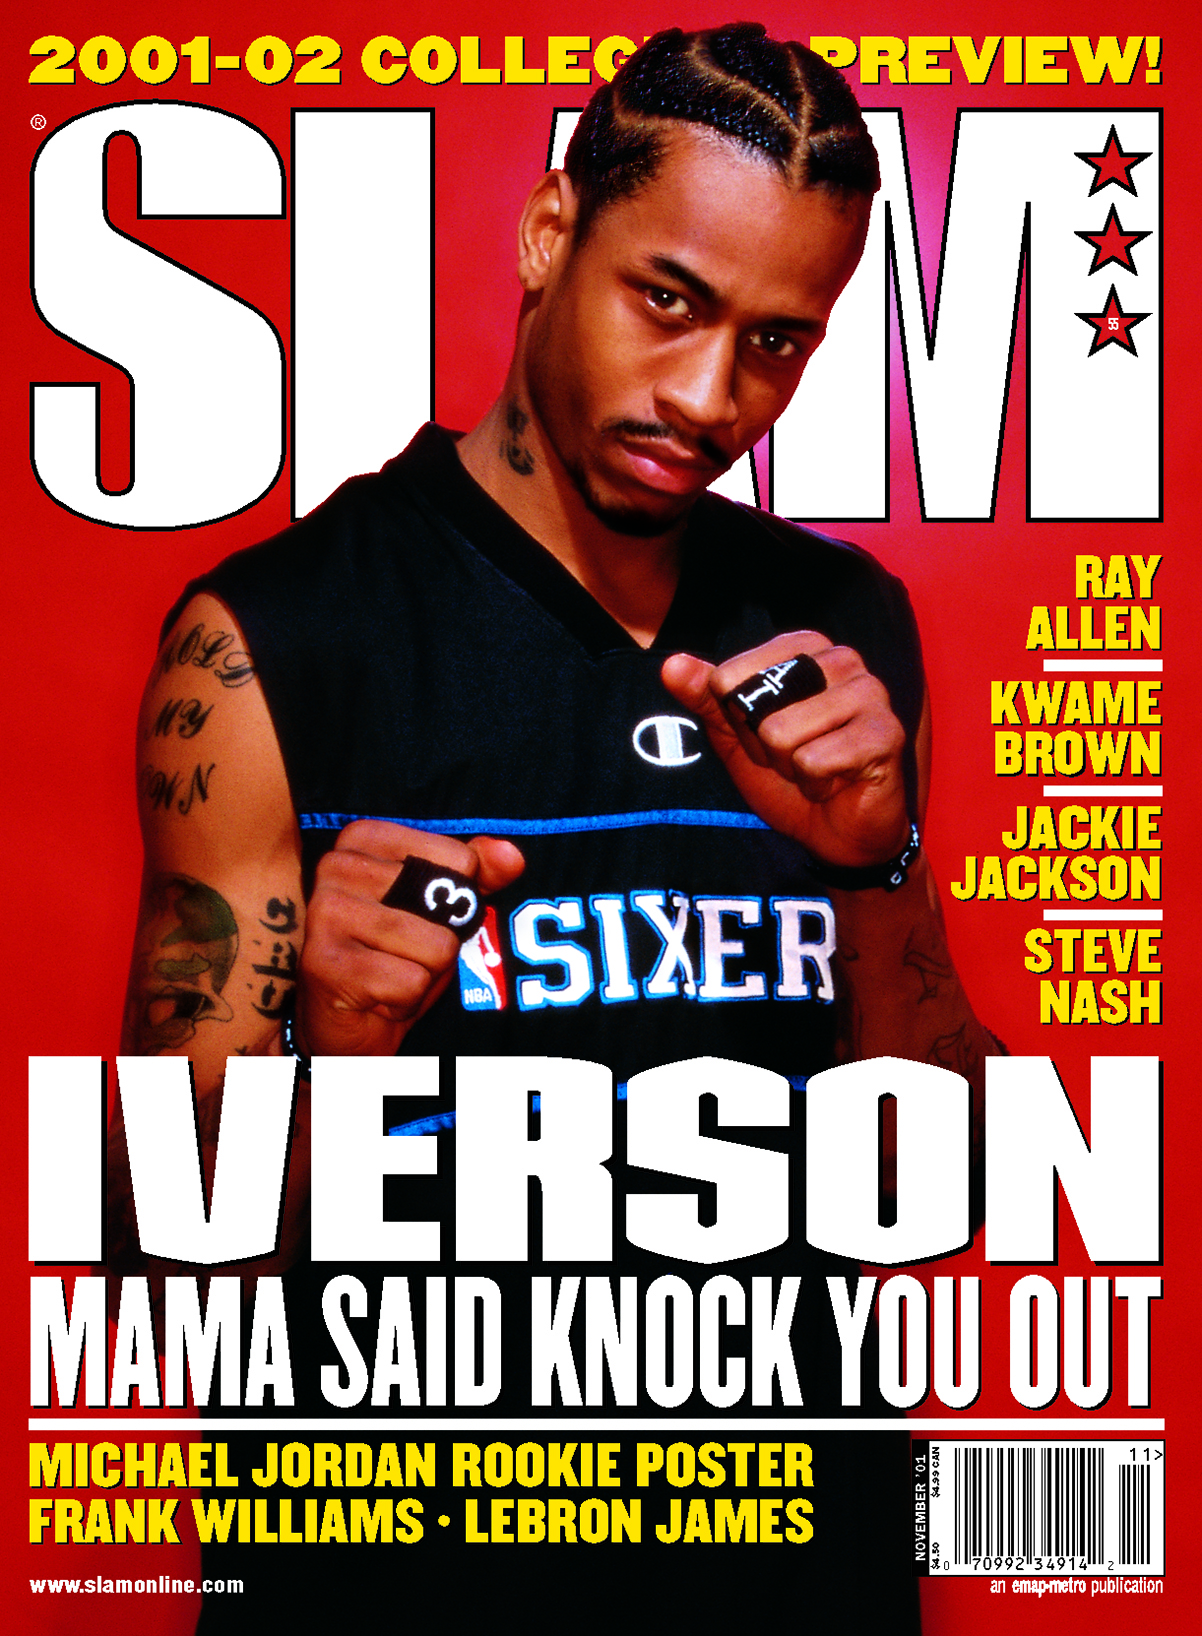 THE 30 PLAYERS WHO DEFINED SLAM’S 30 YEARS: Allen Iverson